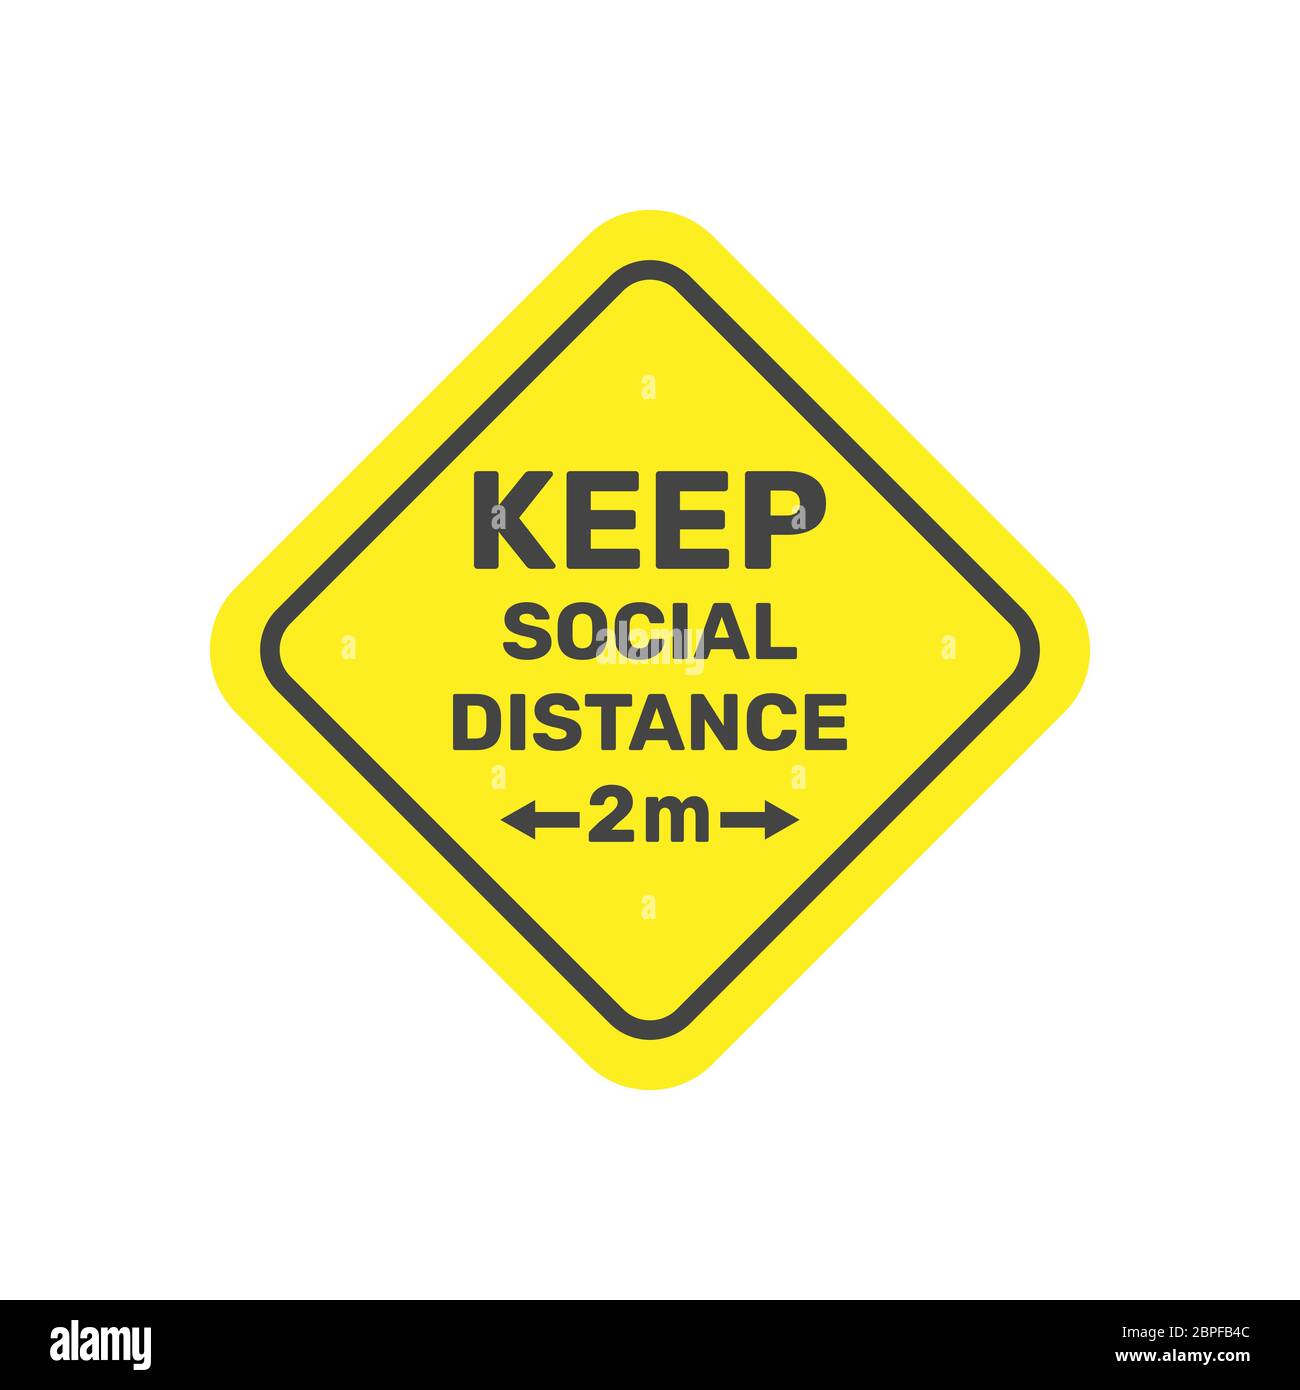 Social Distancing. Keep safe distance 2 metres icon. Warning Sign. Vector Image. EPS 10. Stock Vector